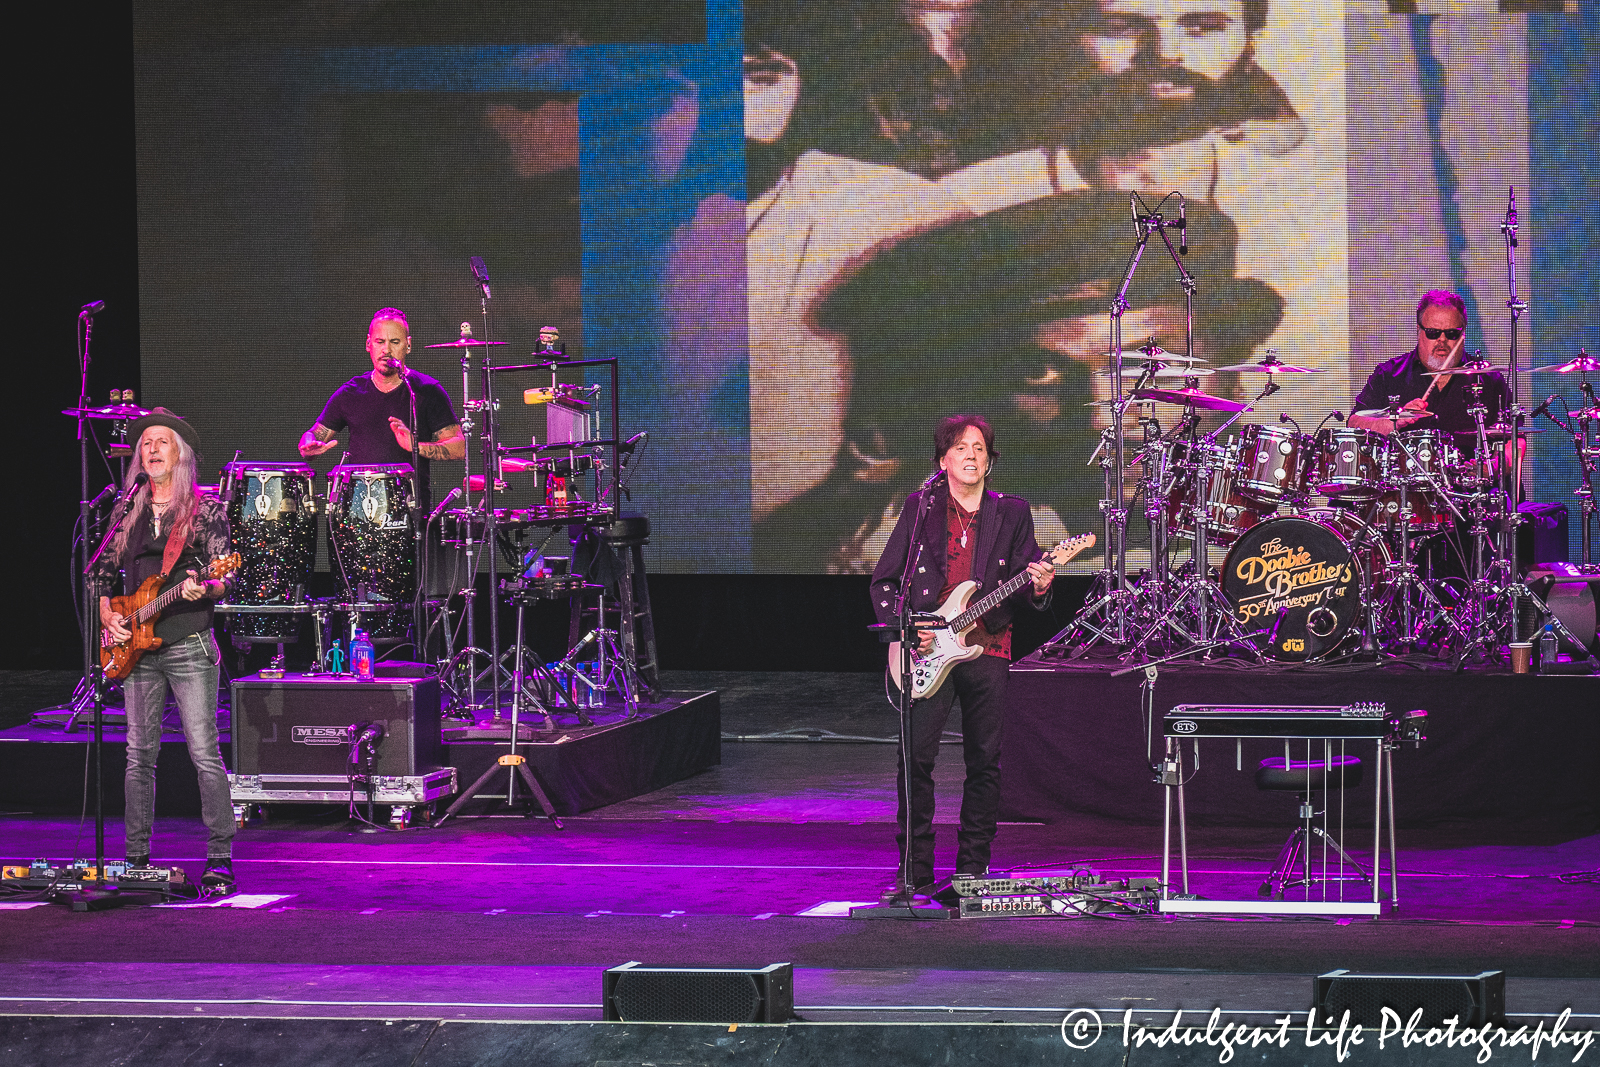 Doobie Brothers founding members Patrick Simmons and John McFee live on stage with percussionist Marc Quiñones and drummer Ed Toth (drums) at Starlight Theatre in Kansas City, MO on June 14, 2023.